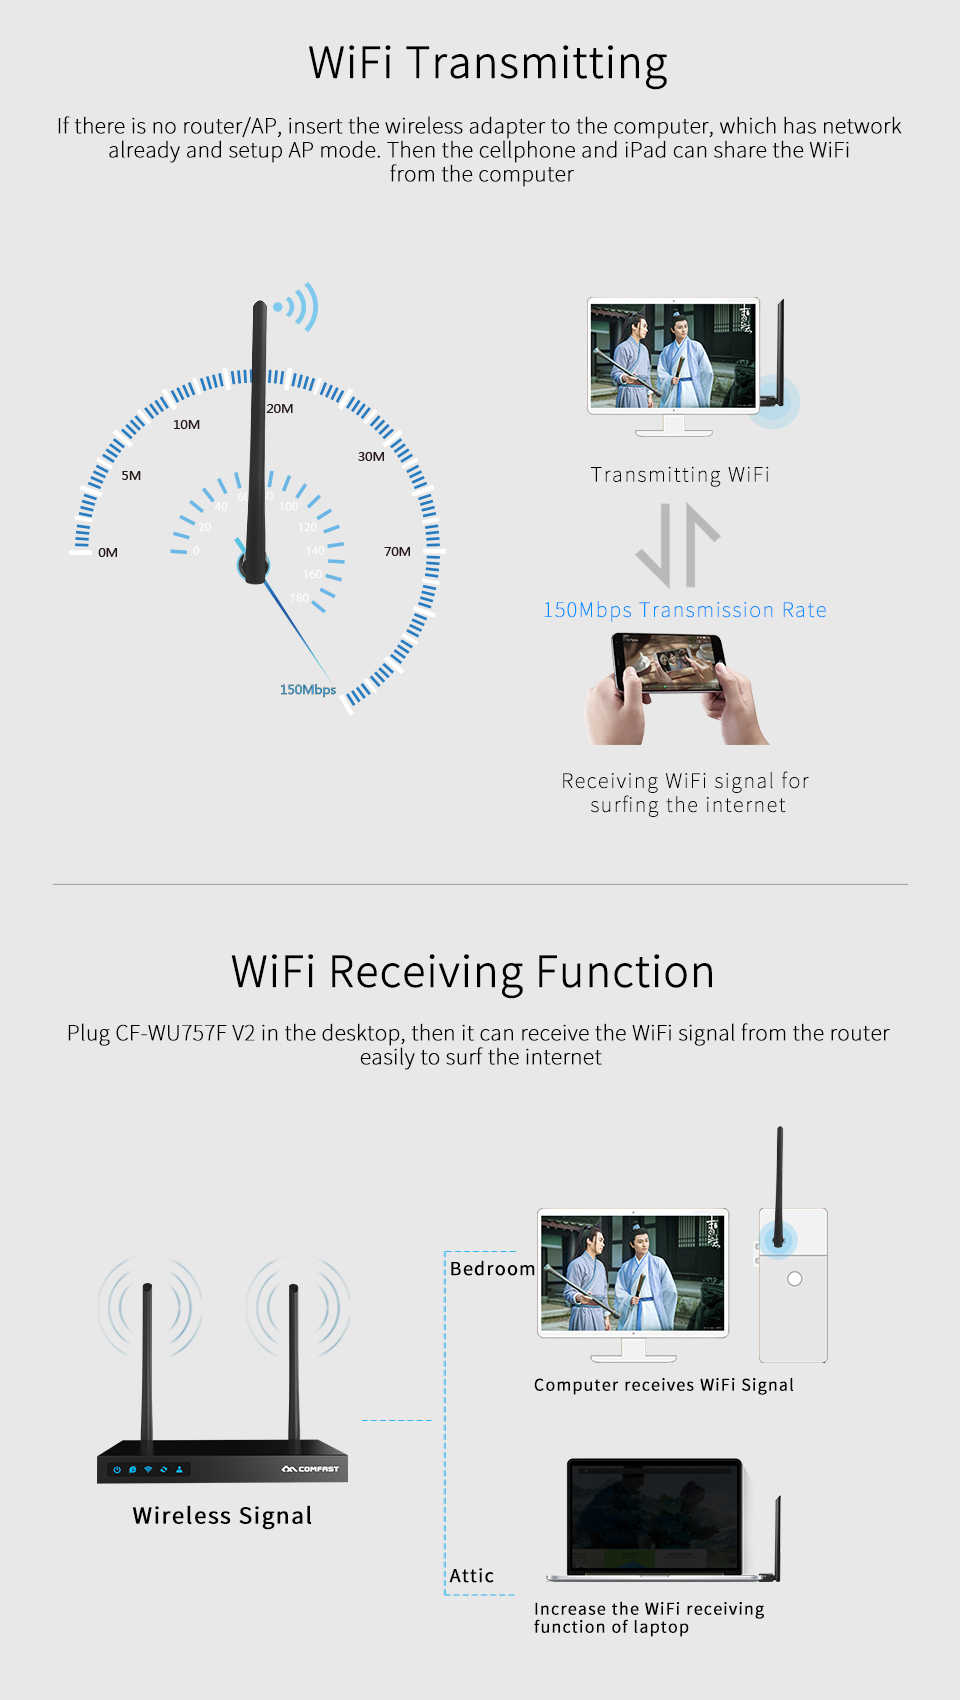 COMFAST-CF-WU757F-V2-150Mbps-24G-Wireless-Wifi-Networking-Adapter-with-6dbi-High-Gain-Antenna-1558579